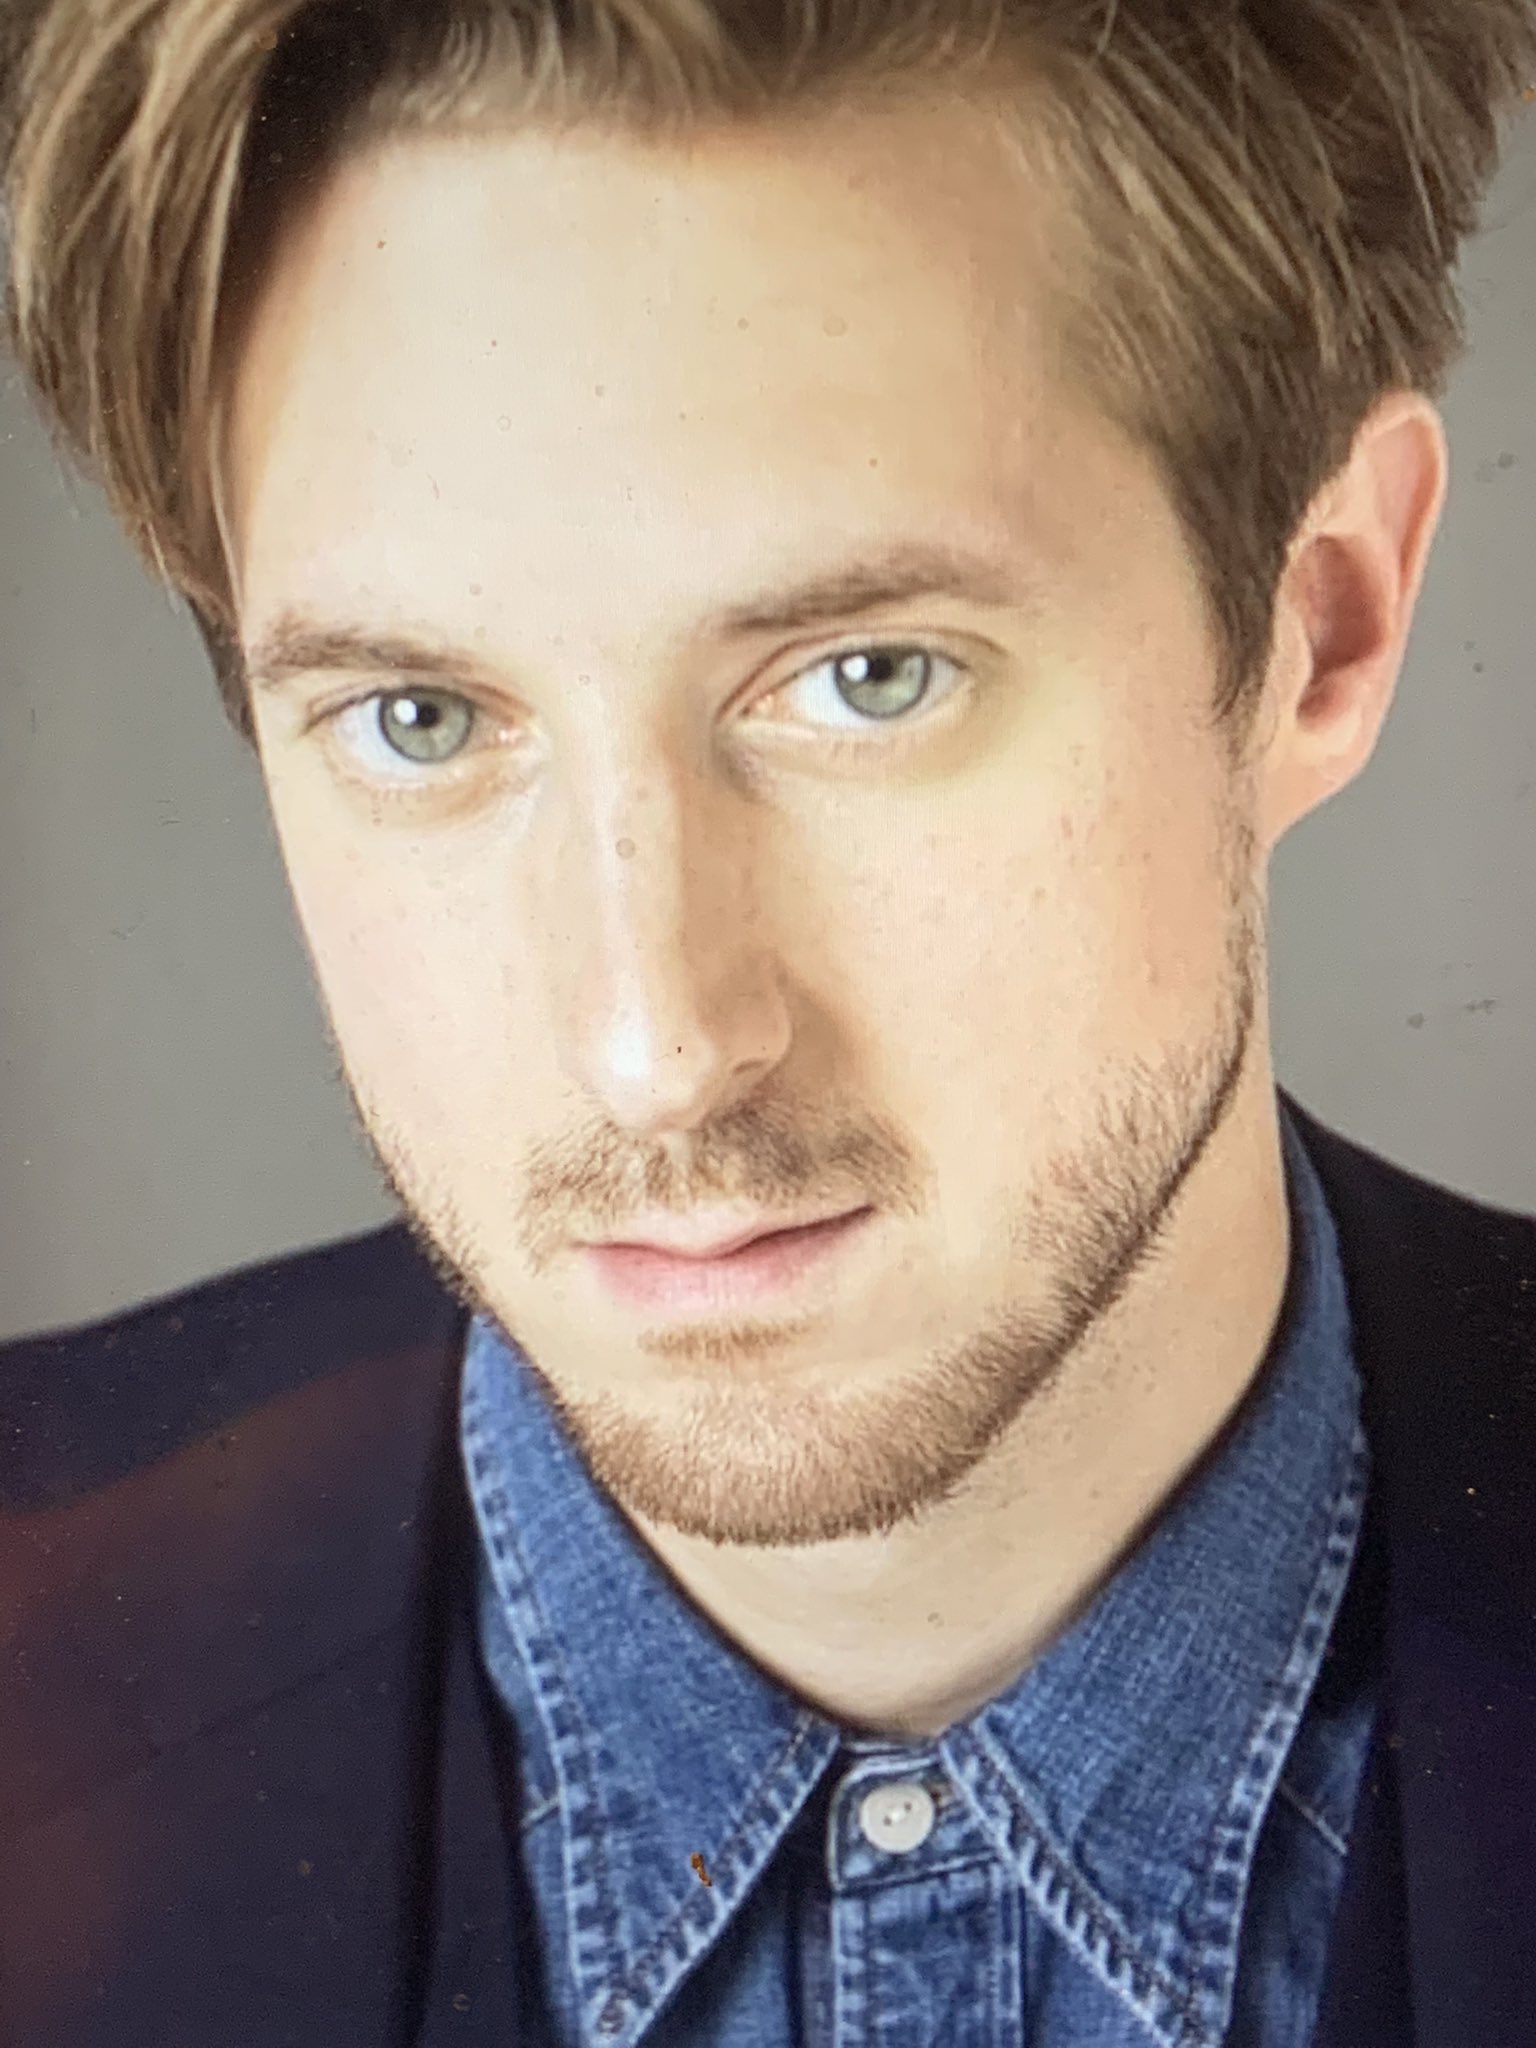 I would like to wish Arthur Darvill a happy 40th birthday today 